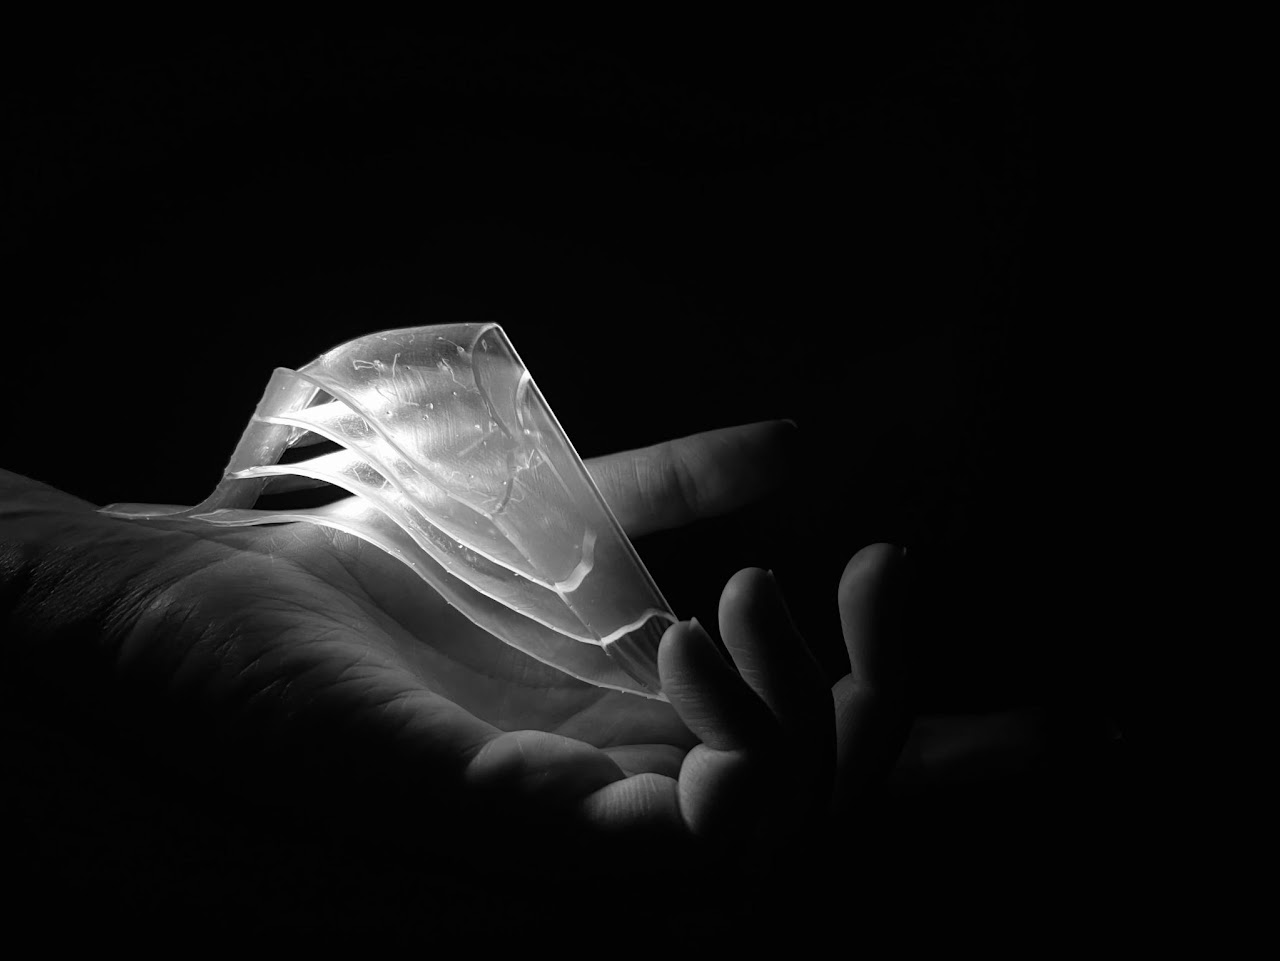 translucent 3d printed 4 layer object lit in a hand